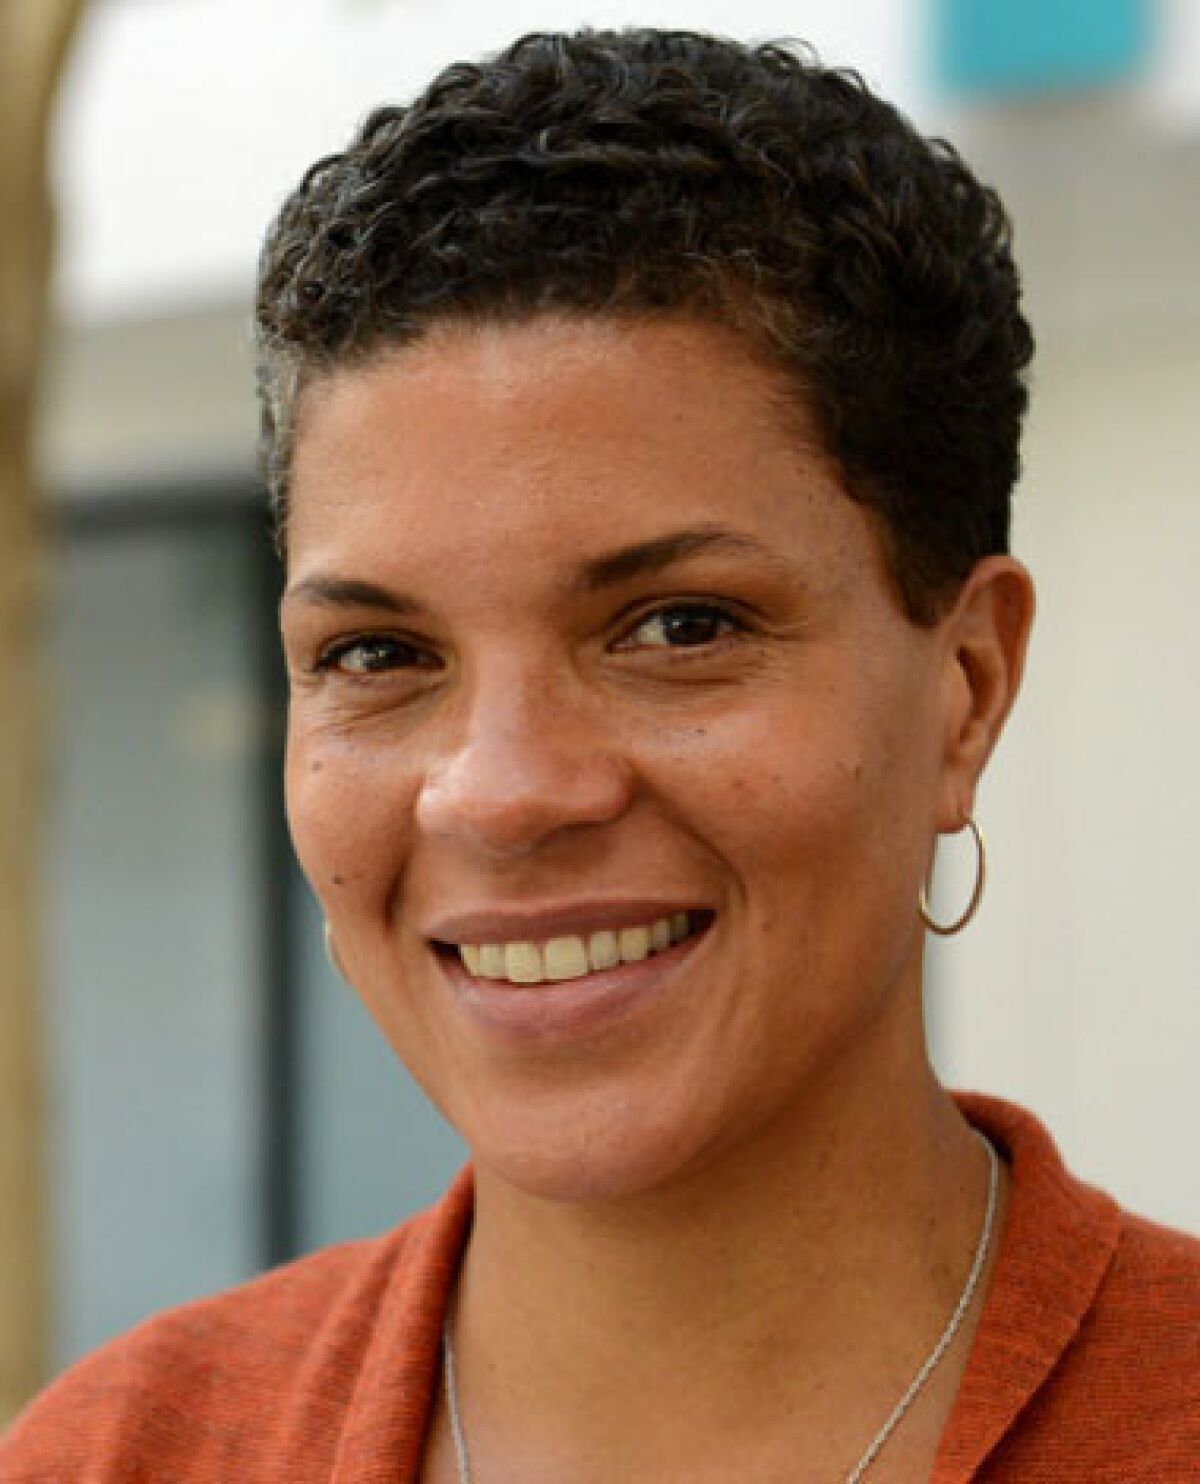 Michelle Alexander | Civil rights lawyer and scholar